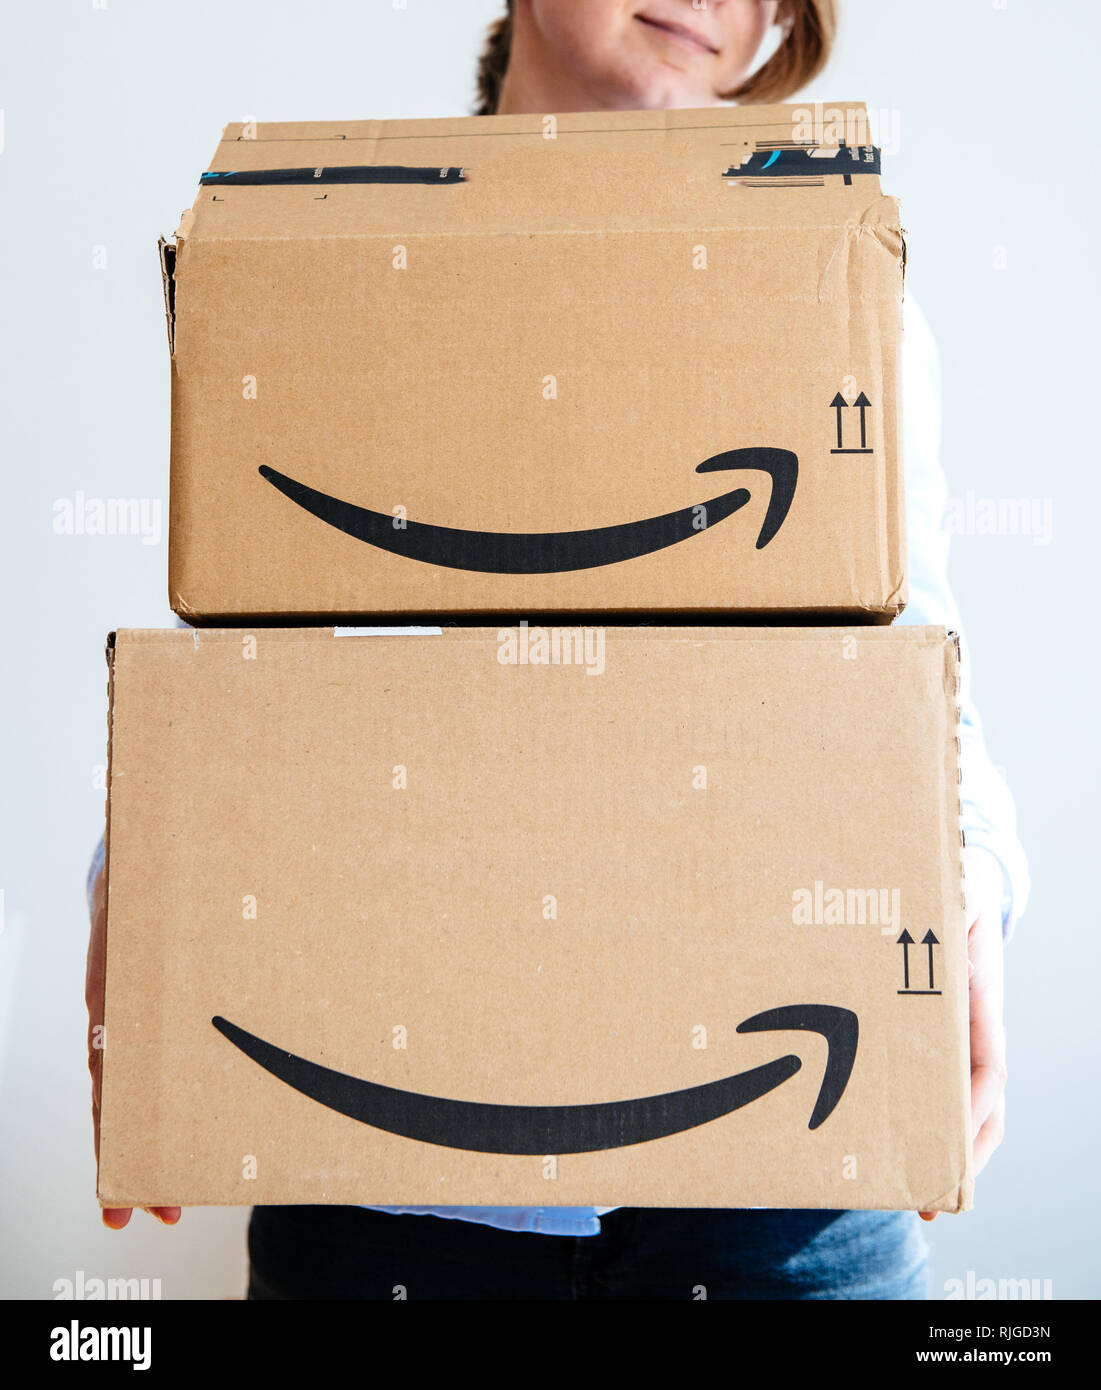 PARIS, FRANCE - MAR 16, 2018: Happy smiling woman holding two large Amazon Prime cardboard boxing after delivery - the first box is open  Stock Photo